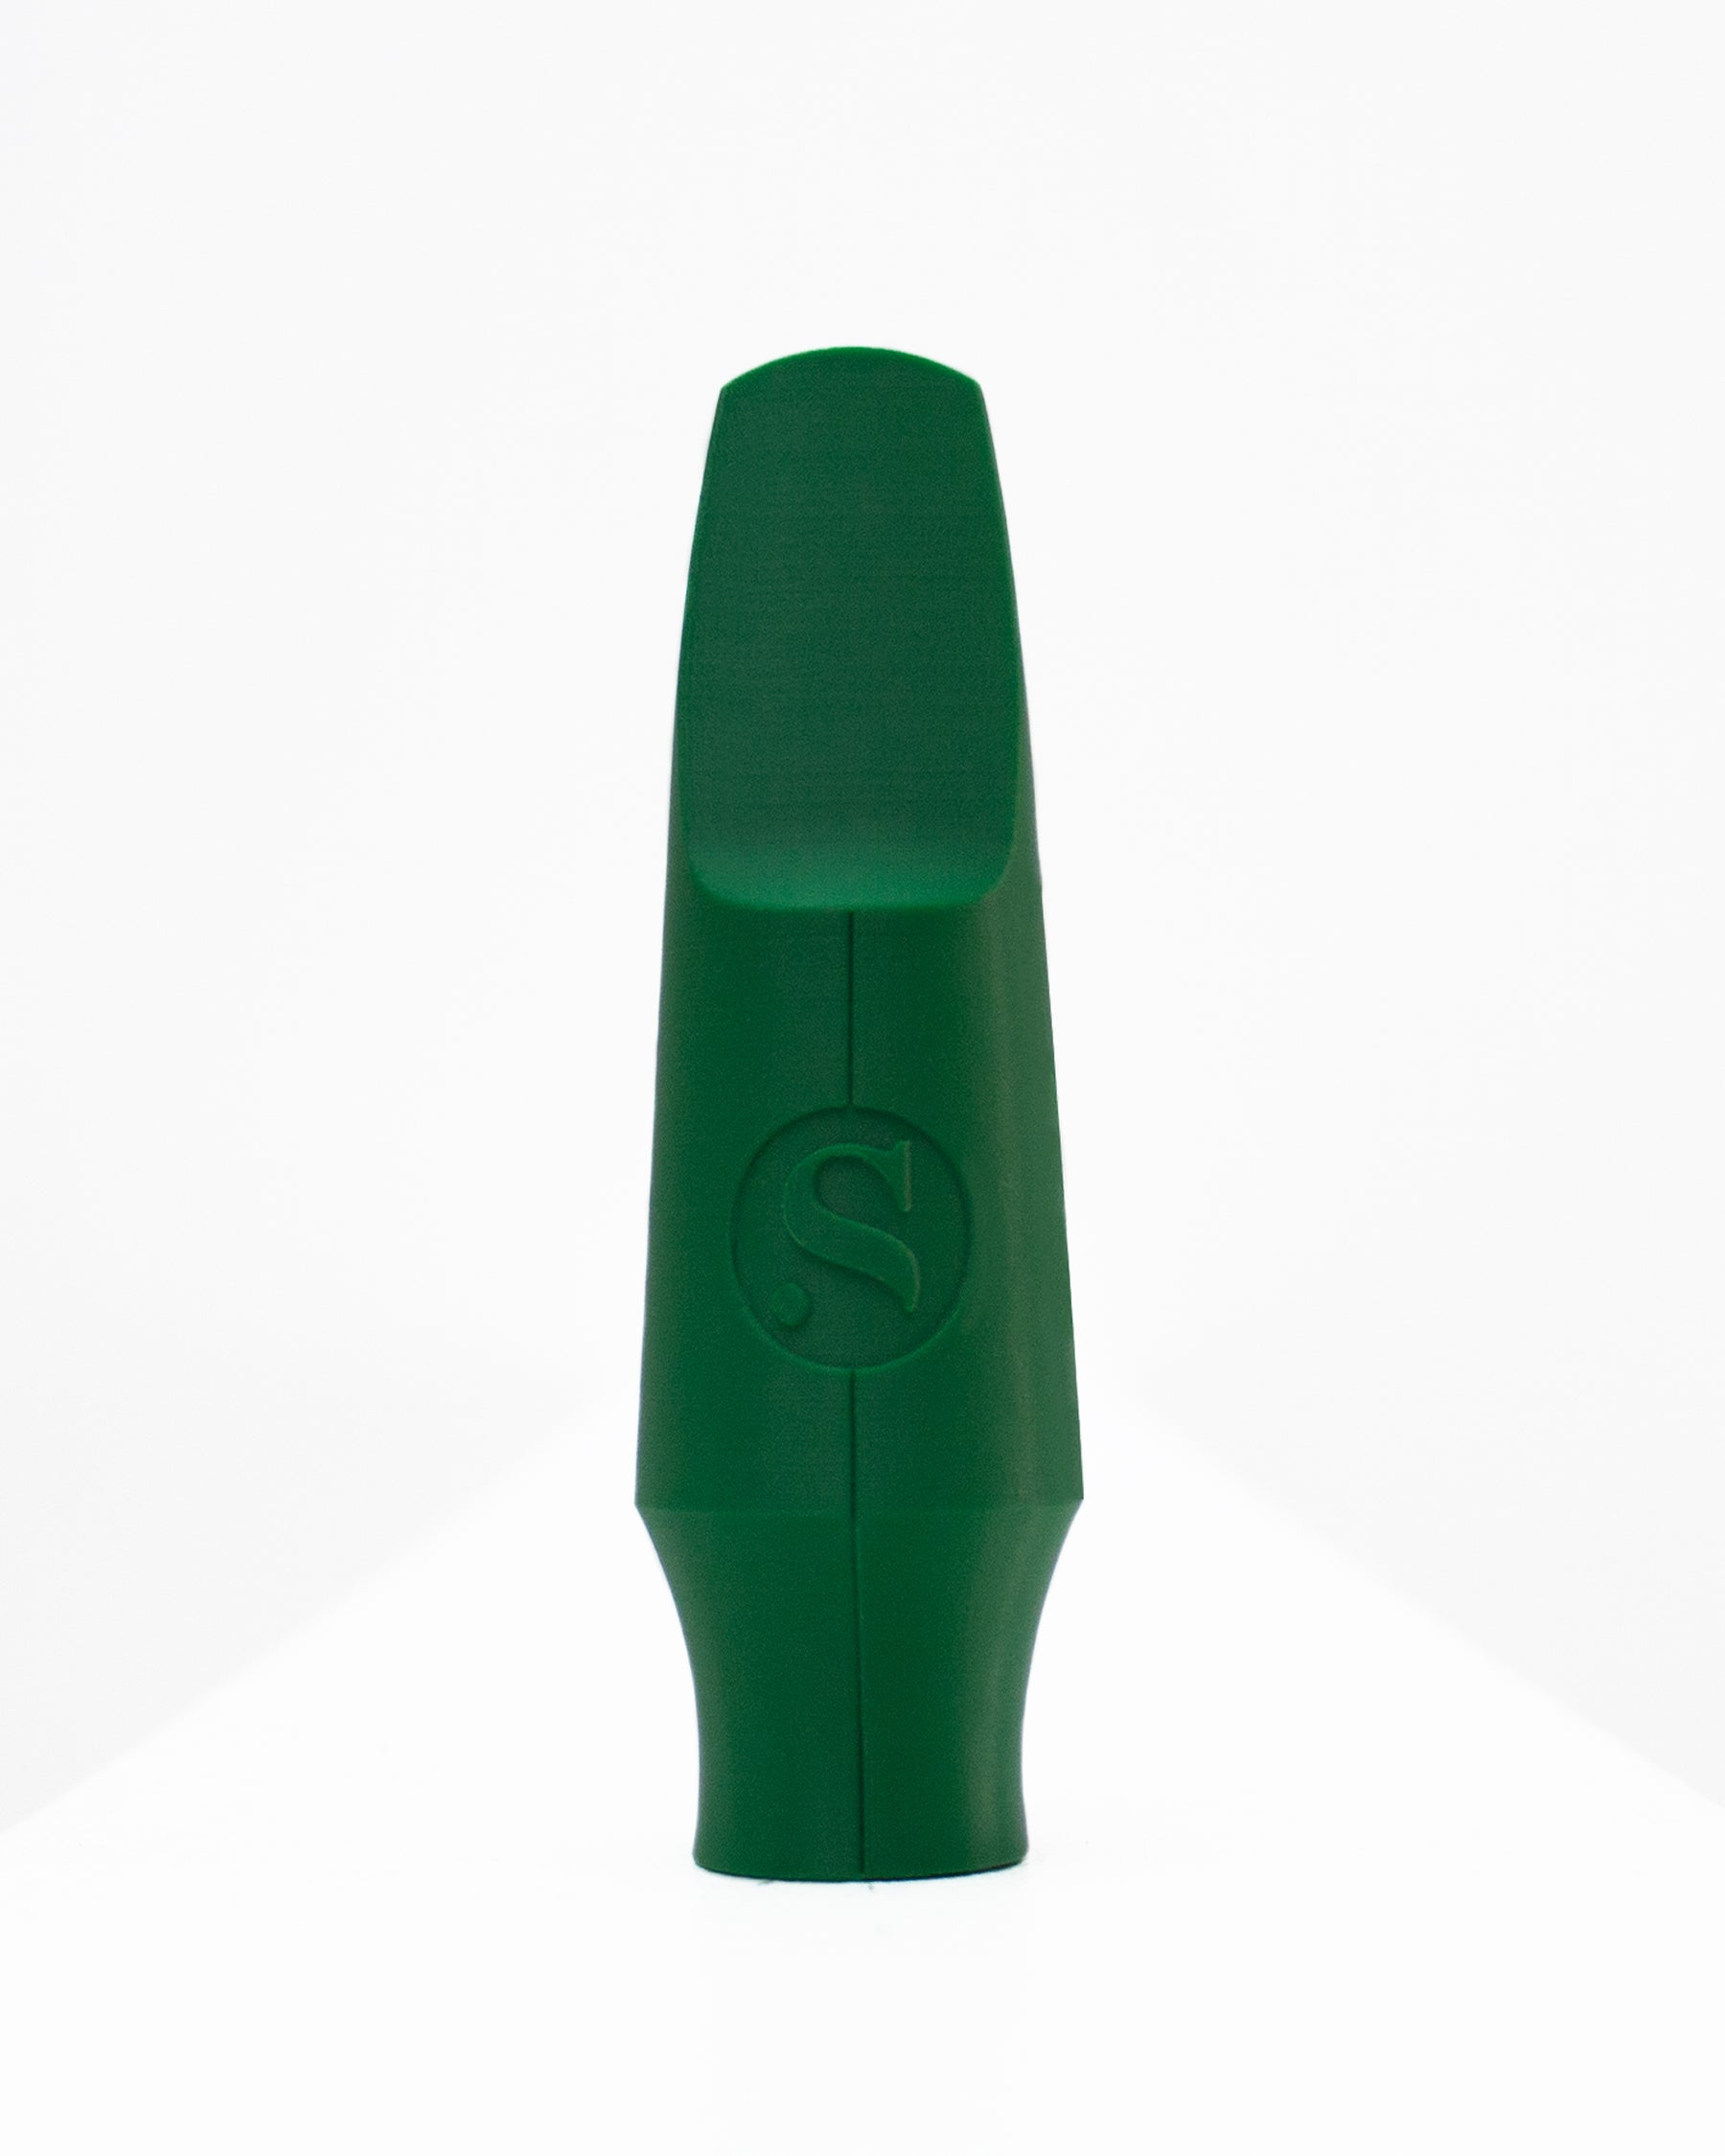 Tenor Originals Saxophone mouthpiece - Smoky by Syos - 8 / Forest Green